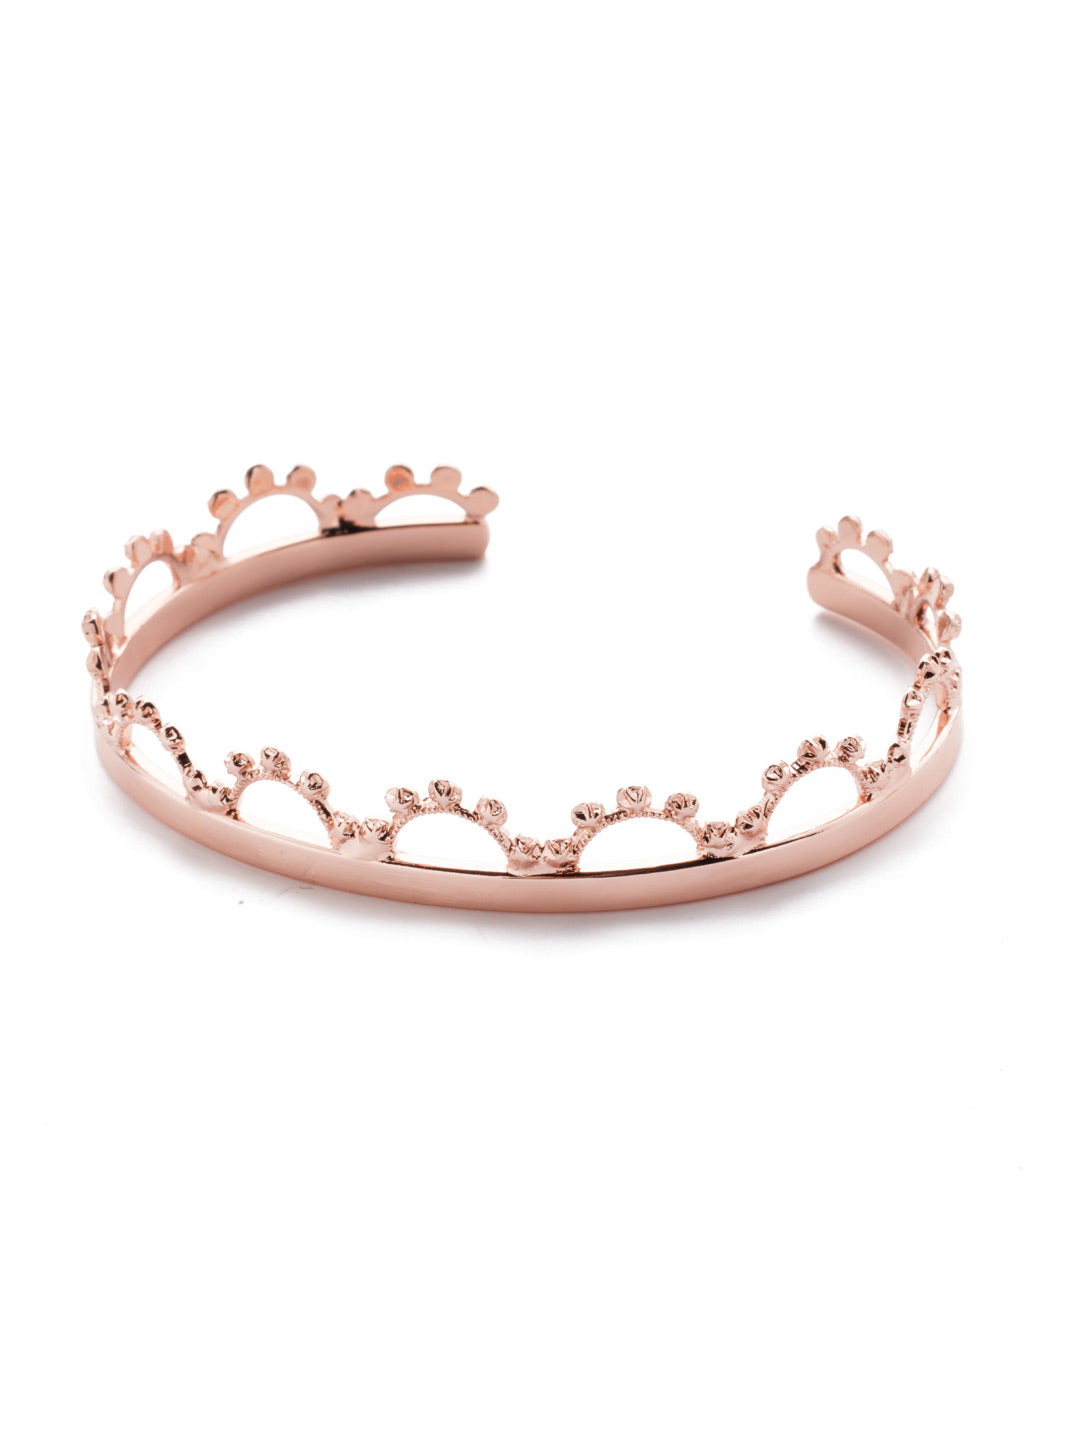 Hollis Cuff Bracelet - 4BES80RGCRY - <p>Our Hollis Cuff Bracelet is royally beautiful. Slip it on and adjust to size then show off its unique, hand-soldered metal detail. From Sorrelli's Crystal collection in our Rose Gold-tone finish.</p>